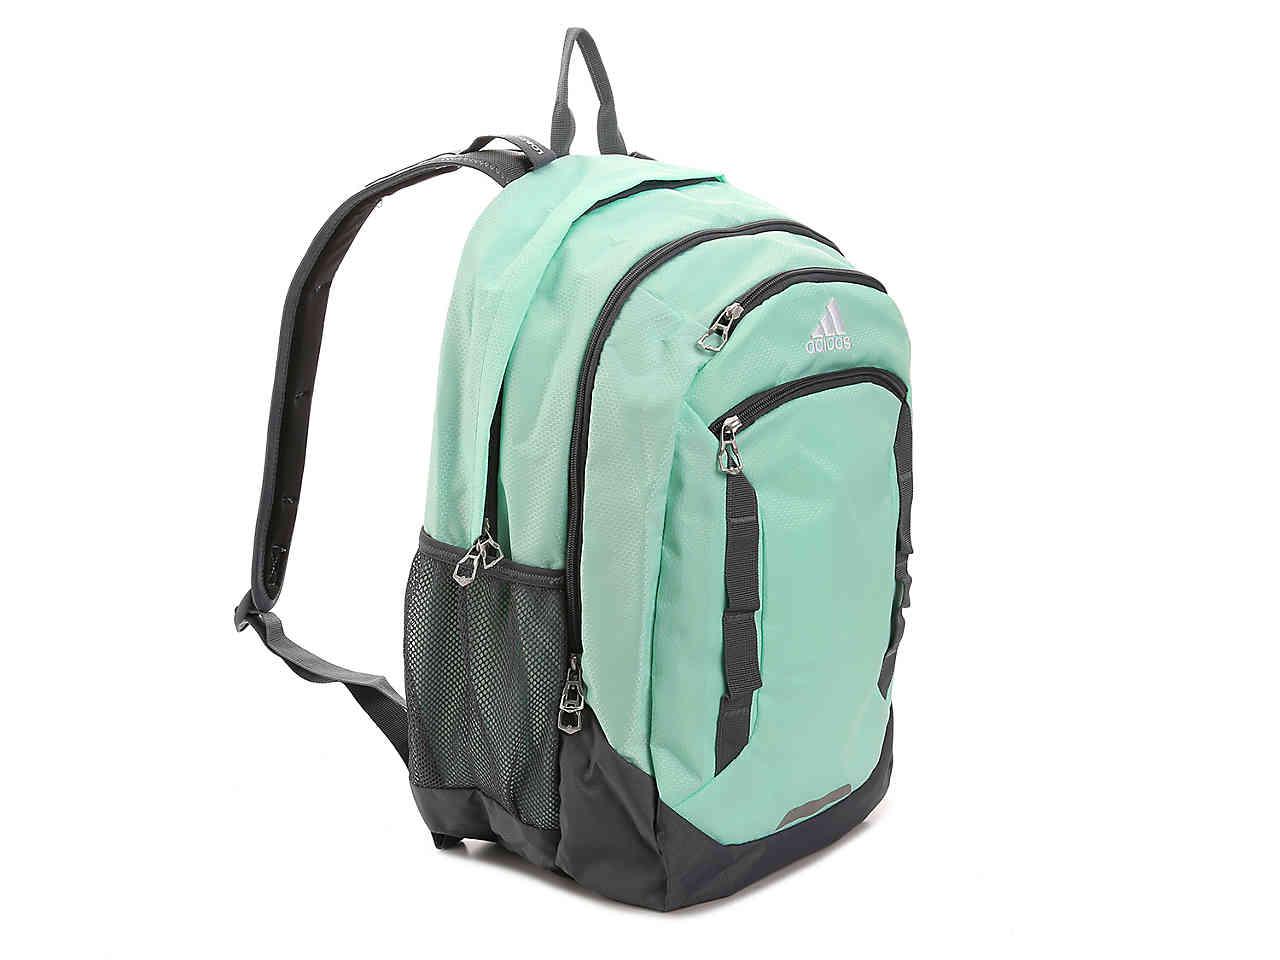 adidas backpack mint green